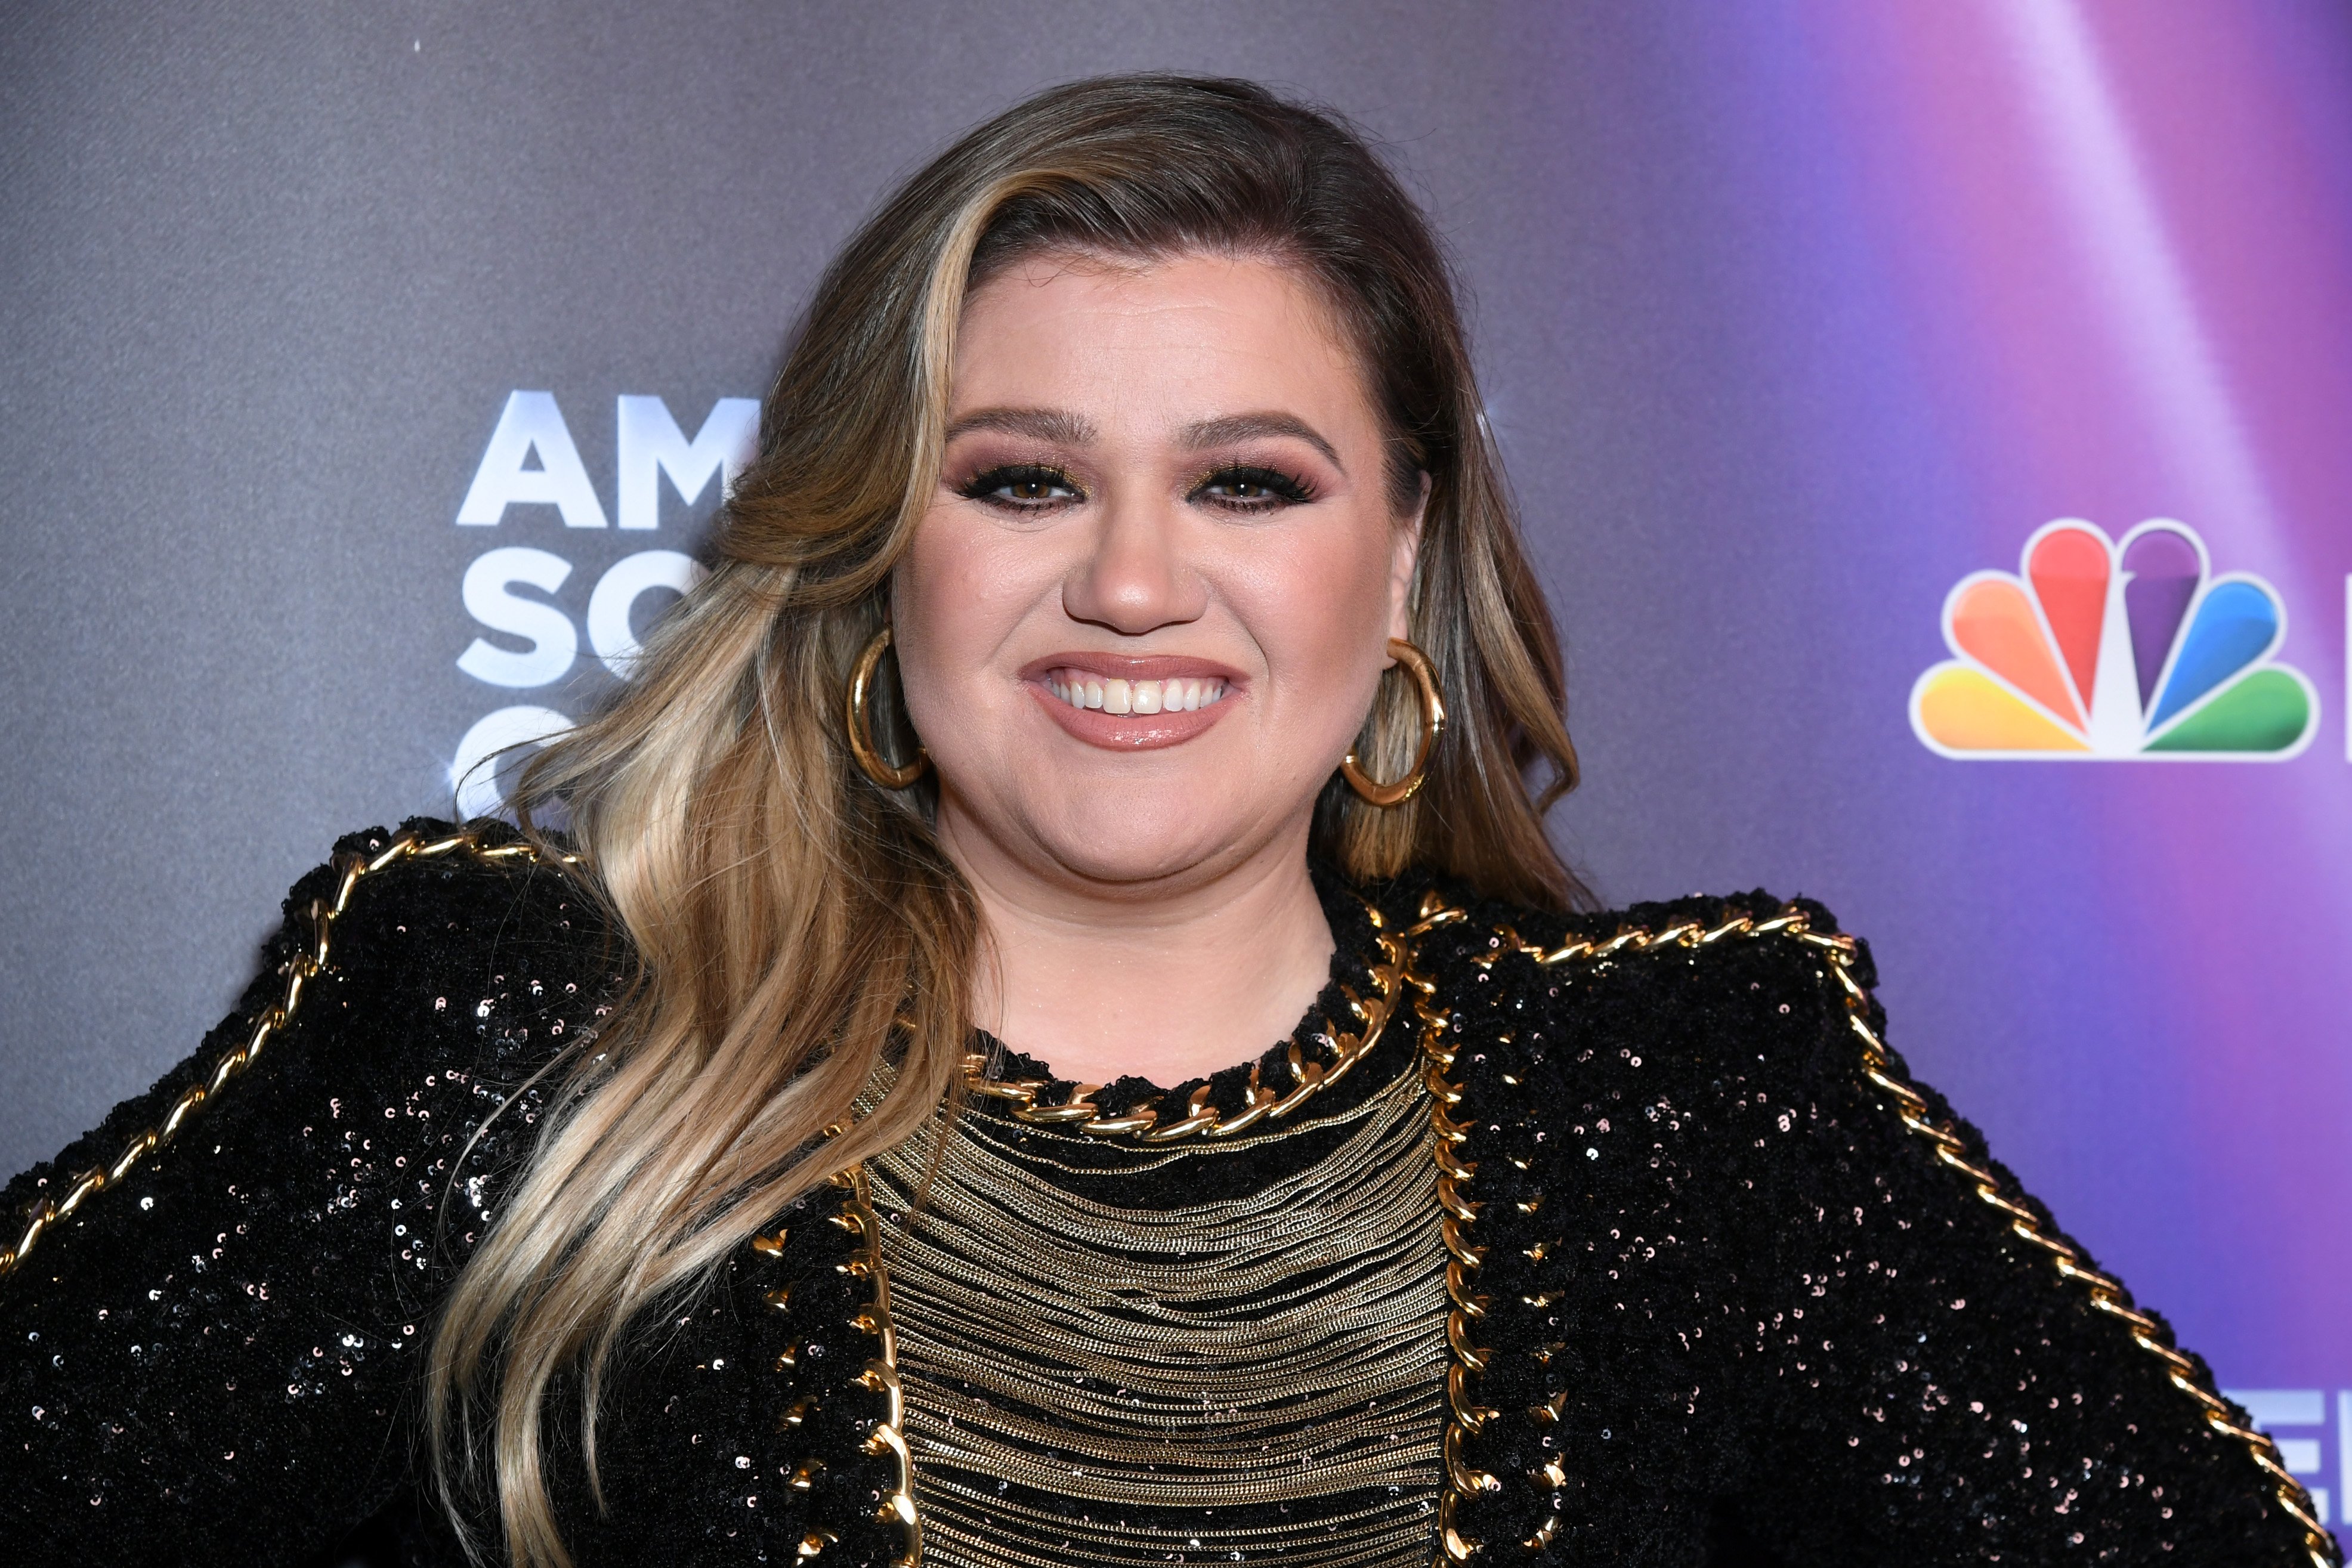  Kelly Clarkson at the red carpet of the live premiere of the grand finals of NBC's "American Song Contest" at Universal Studios Hollywood on May 09, 2022 in Universal City, California. | Source: Getty Images